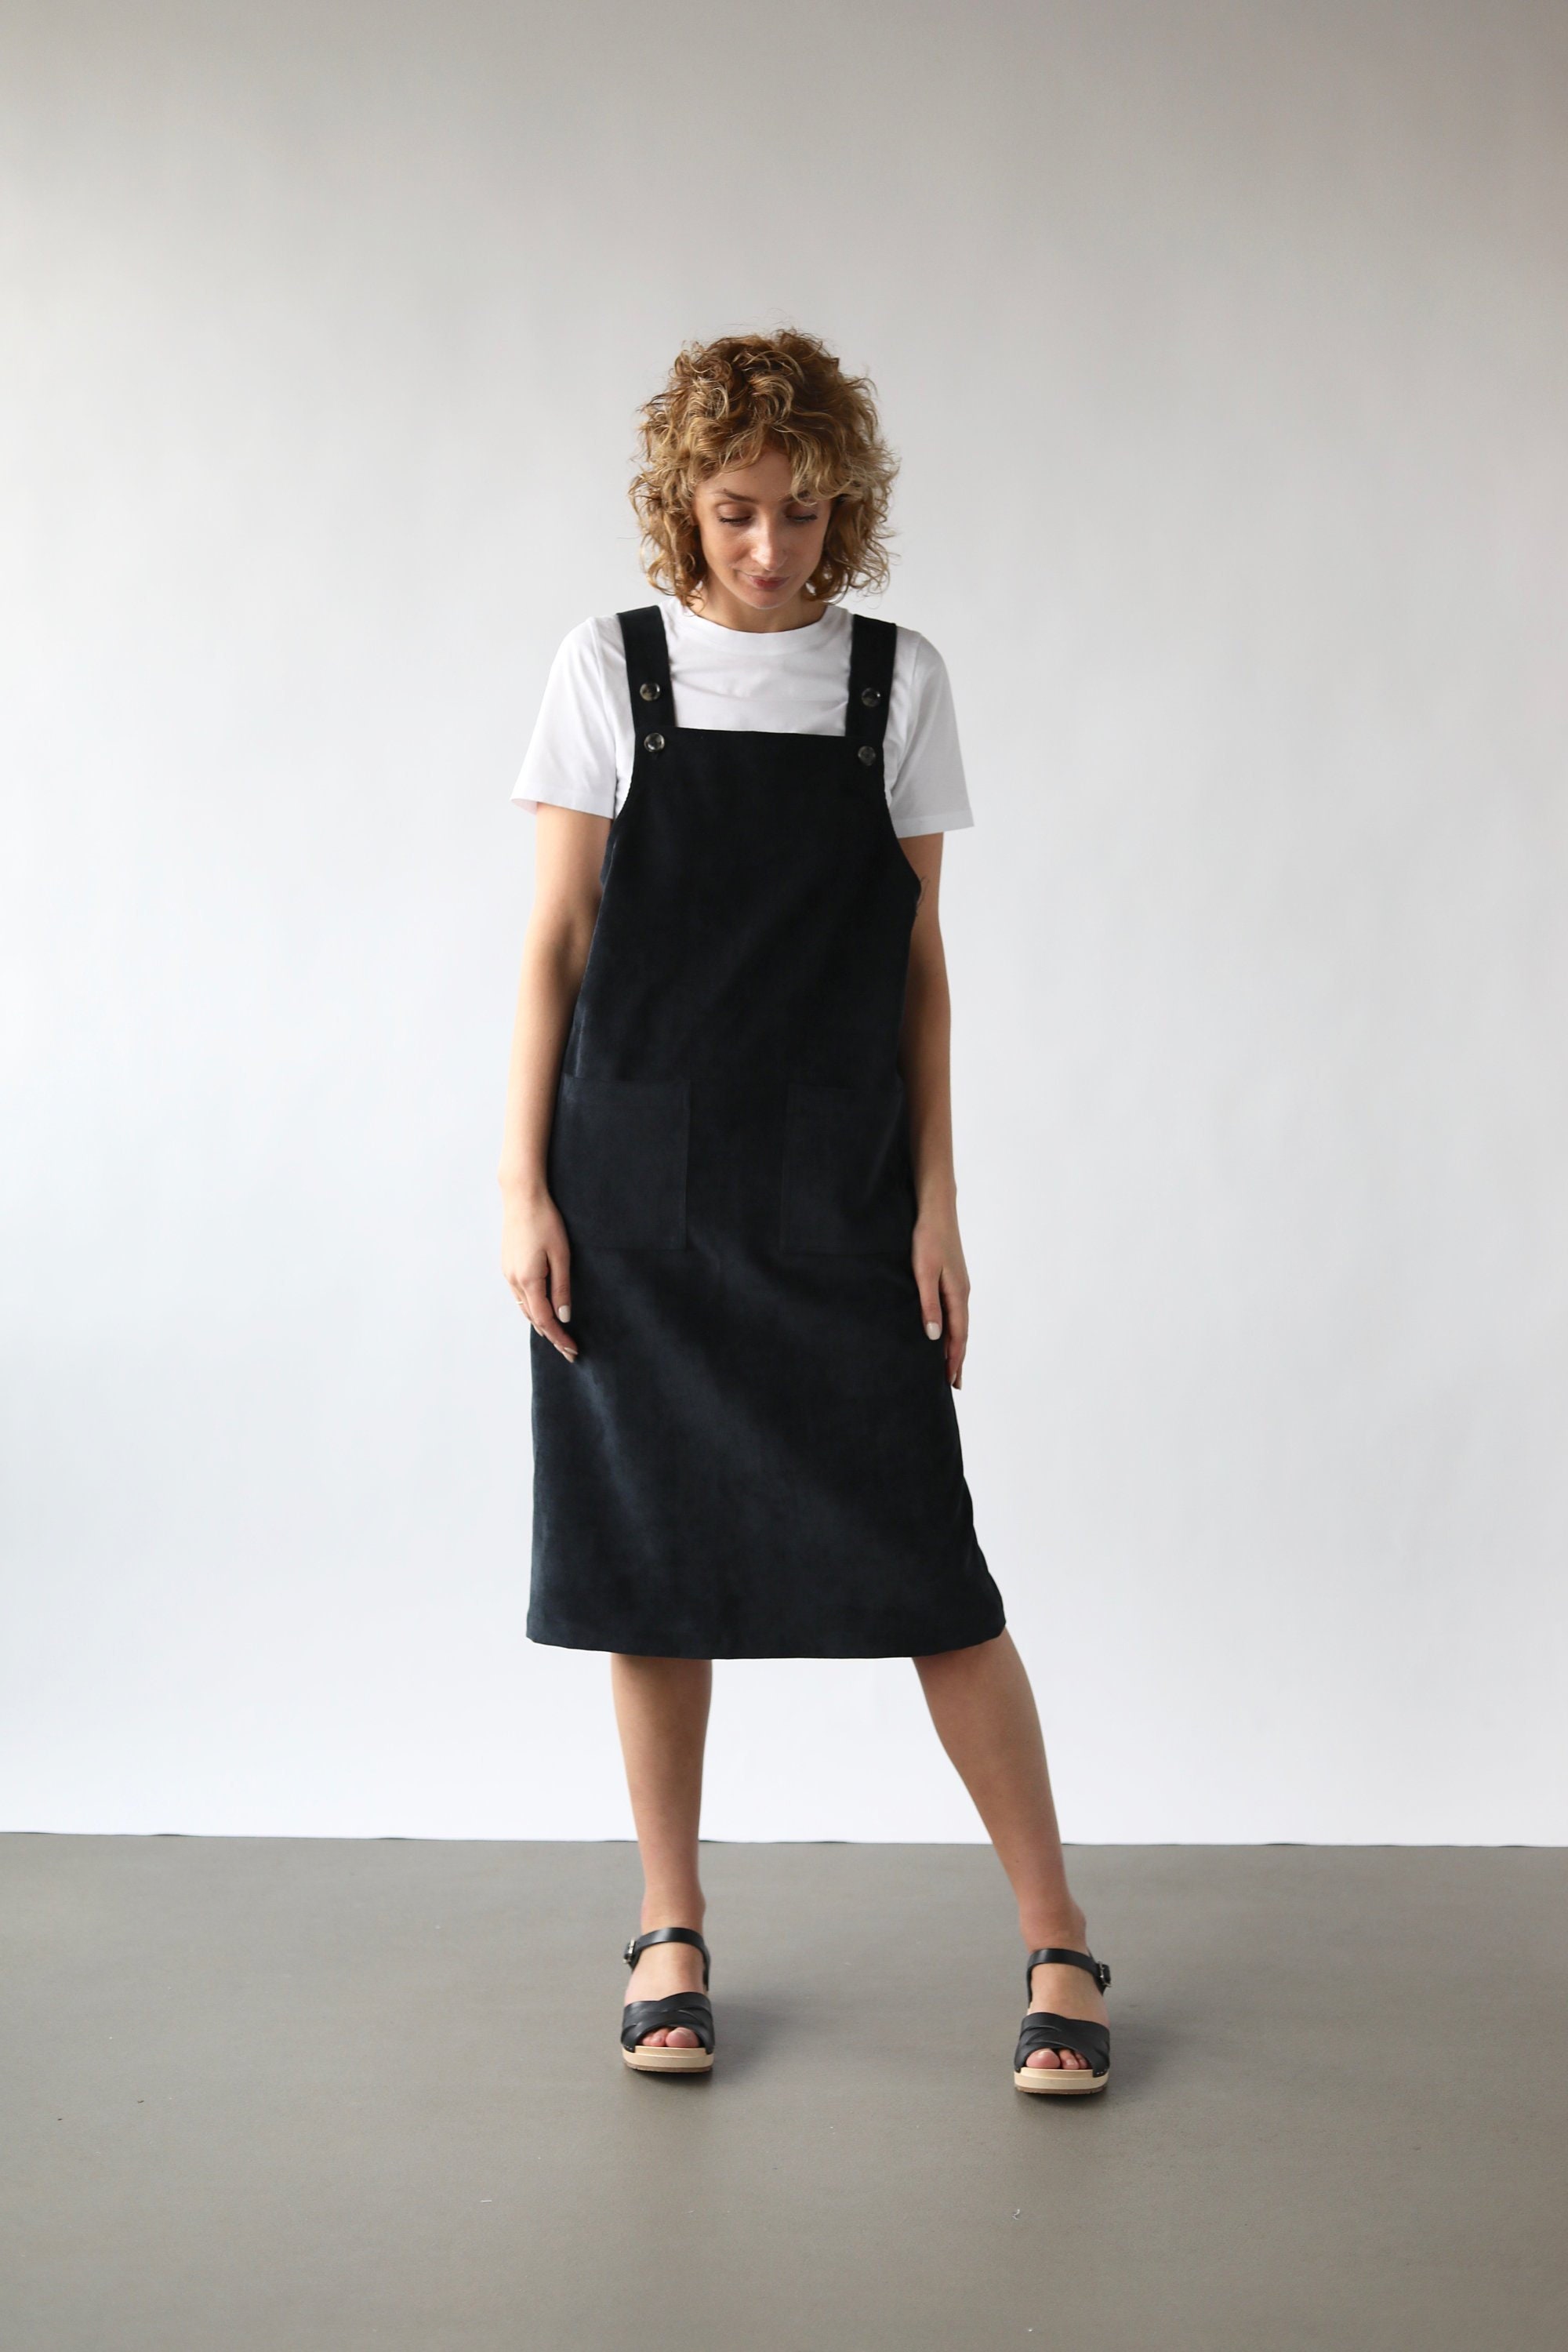 apron dress - Google Search | Womens pinafore dress, Sewing dresses, Clothes